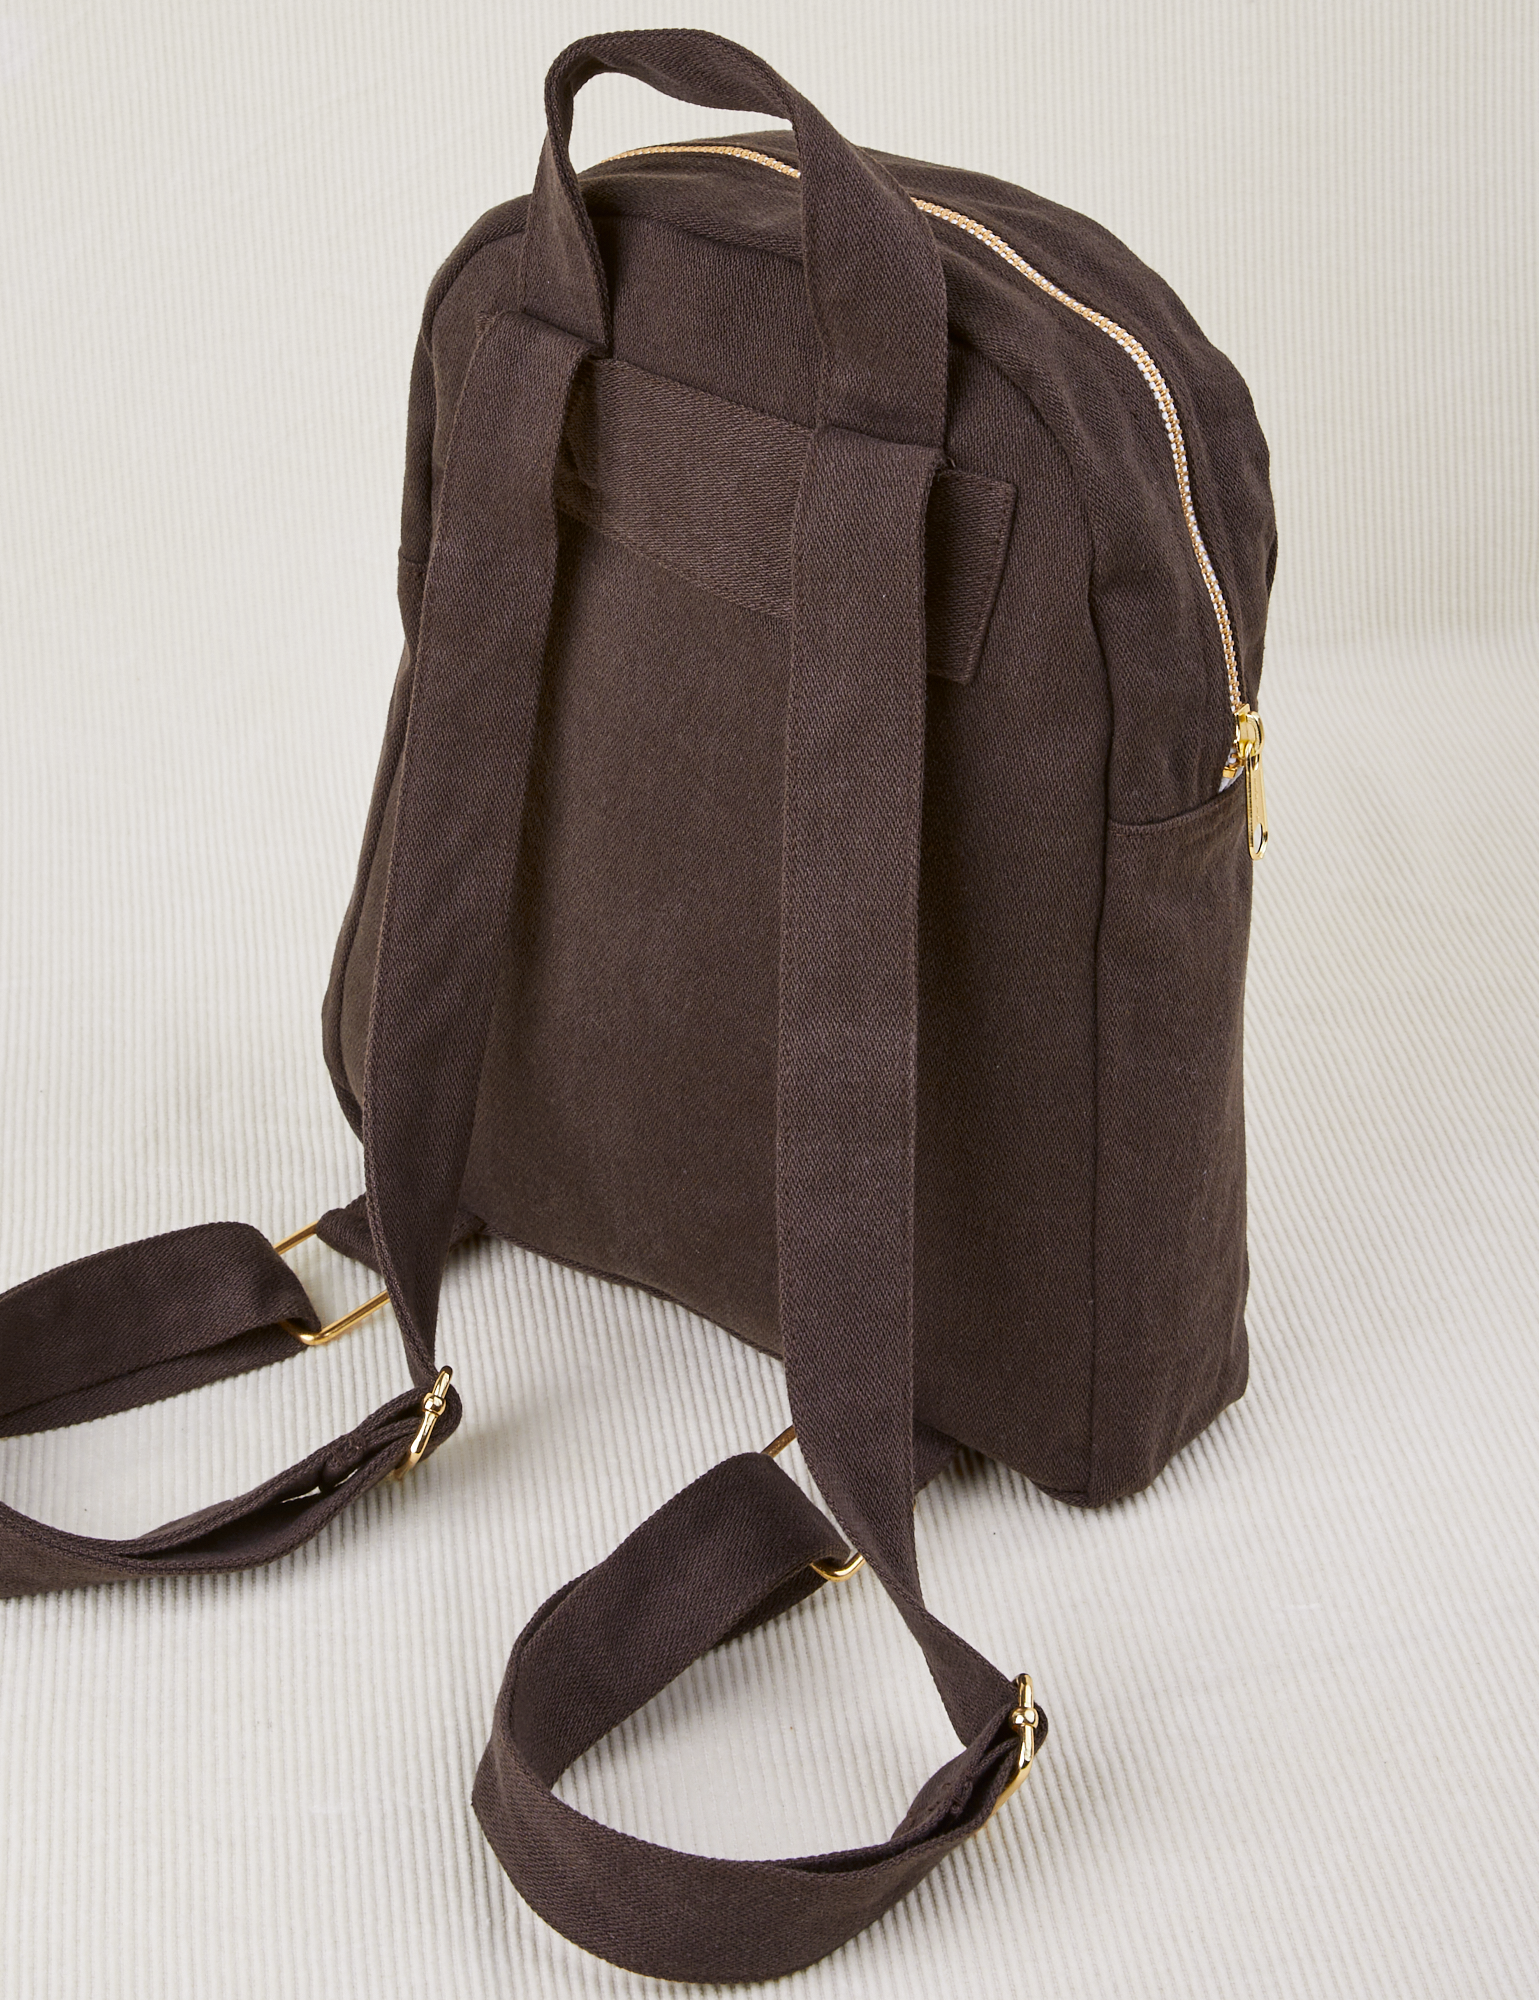 Mini Backpack in Espresso Brown back view